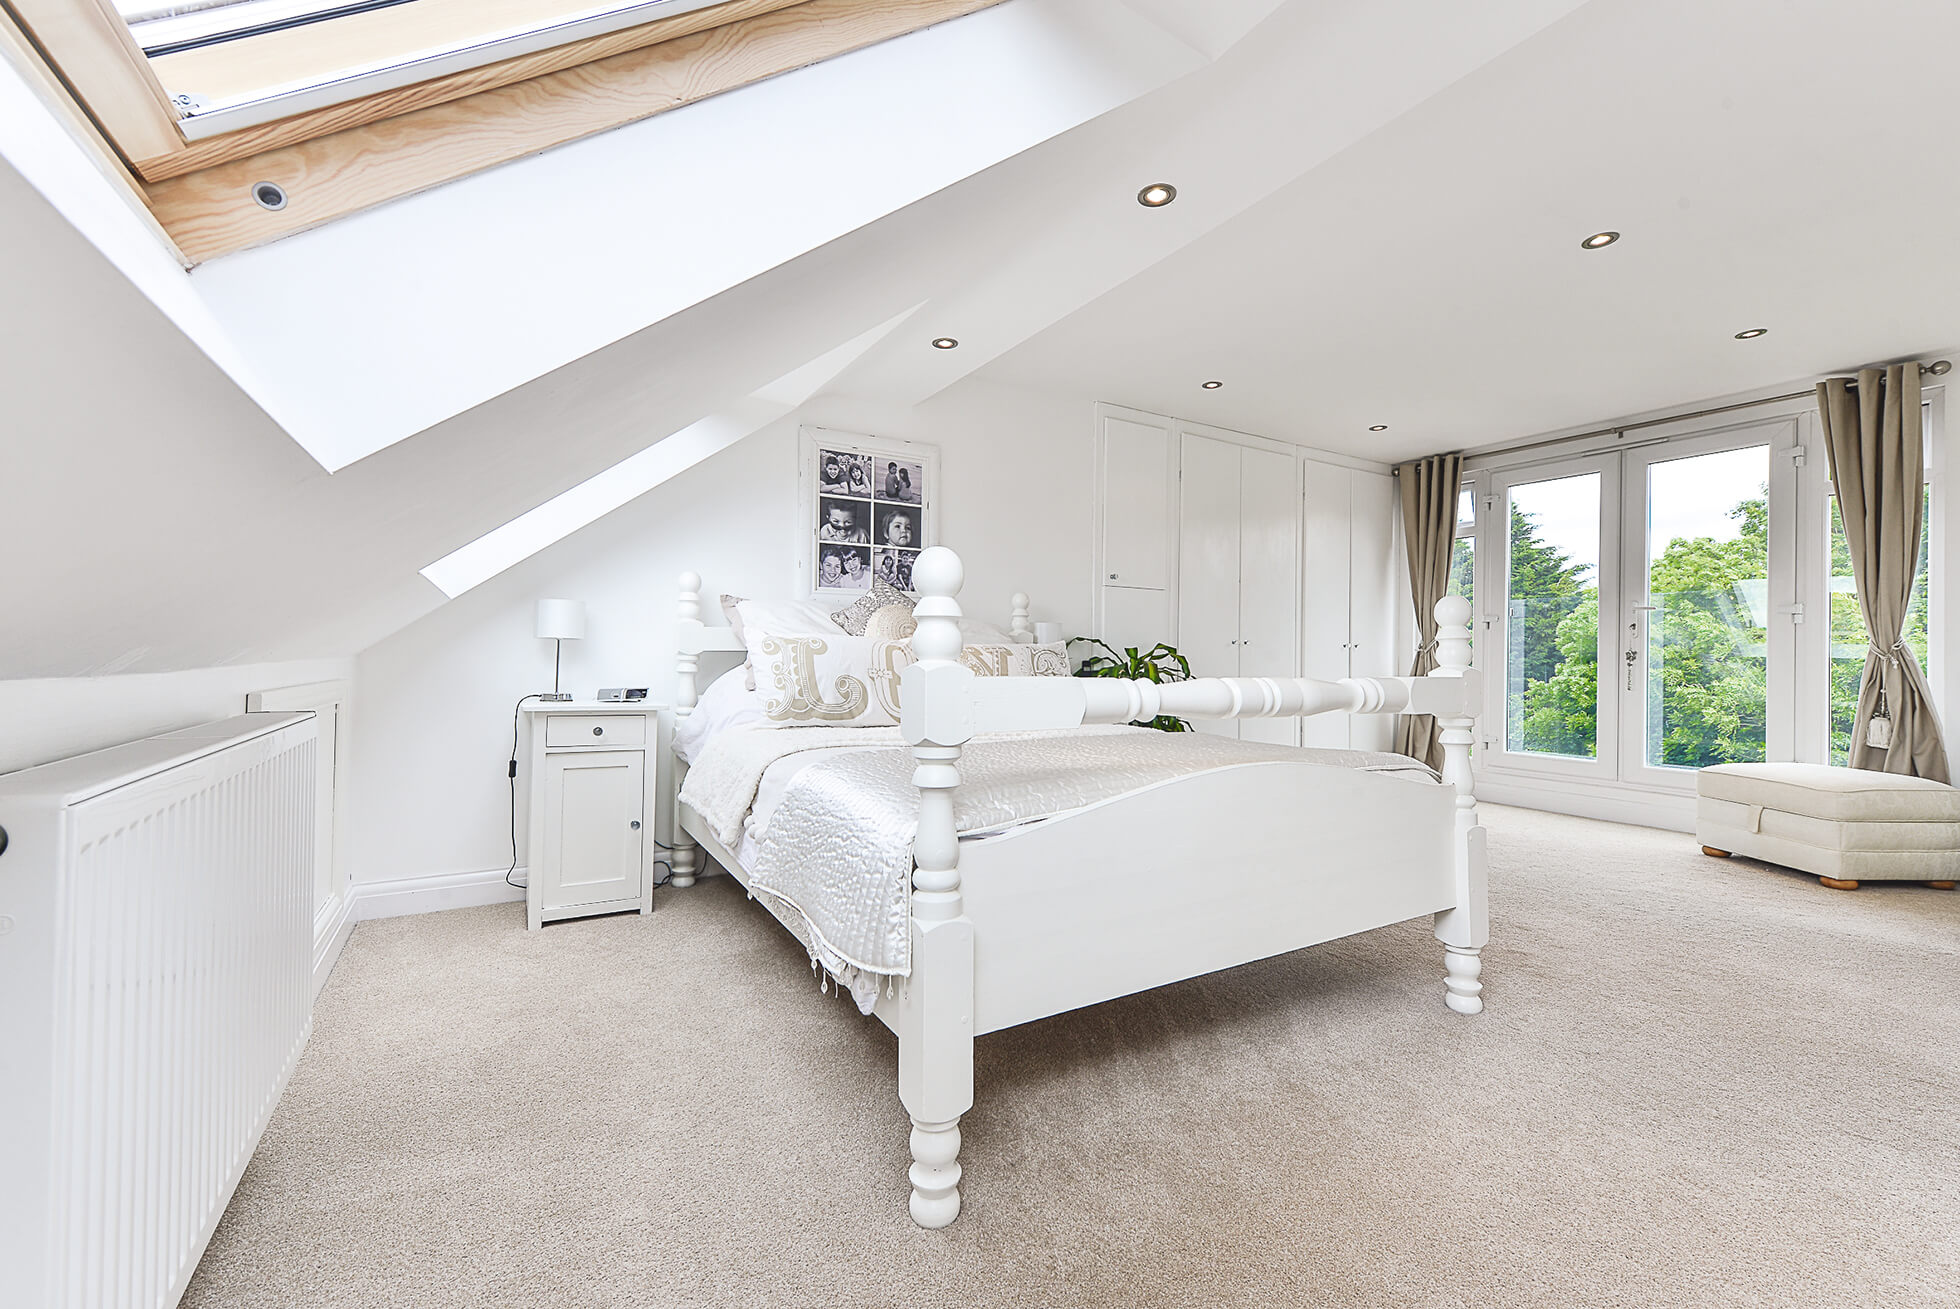 Do you have a question about converting your Loft in Berkhamsted? Here are the most popular questions asked by our clients.